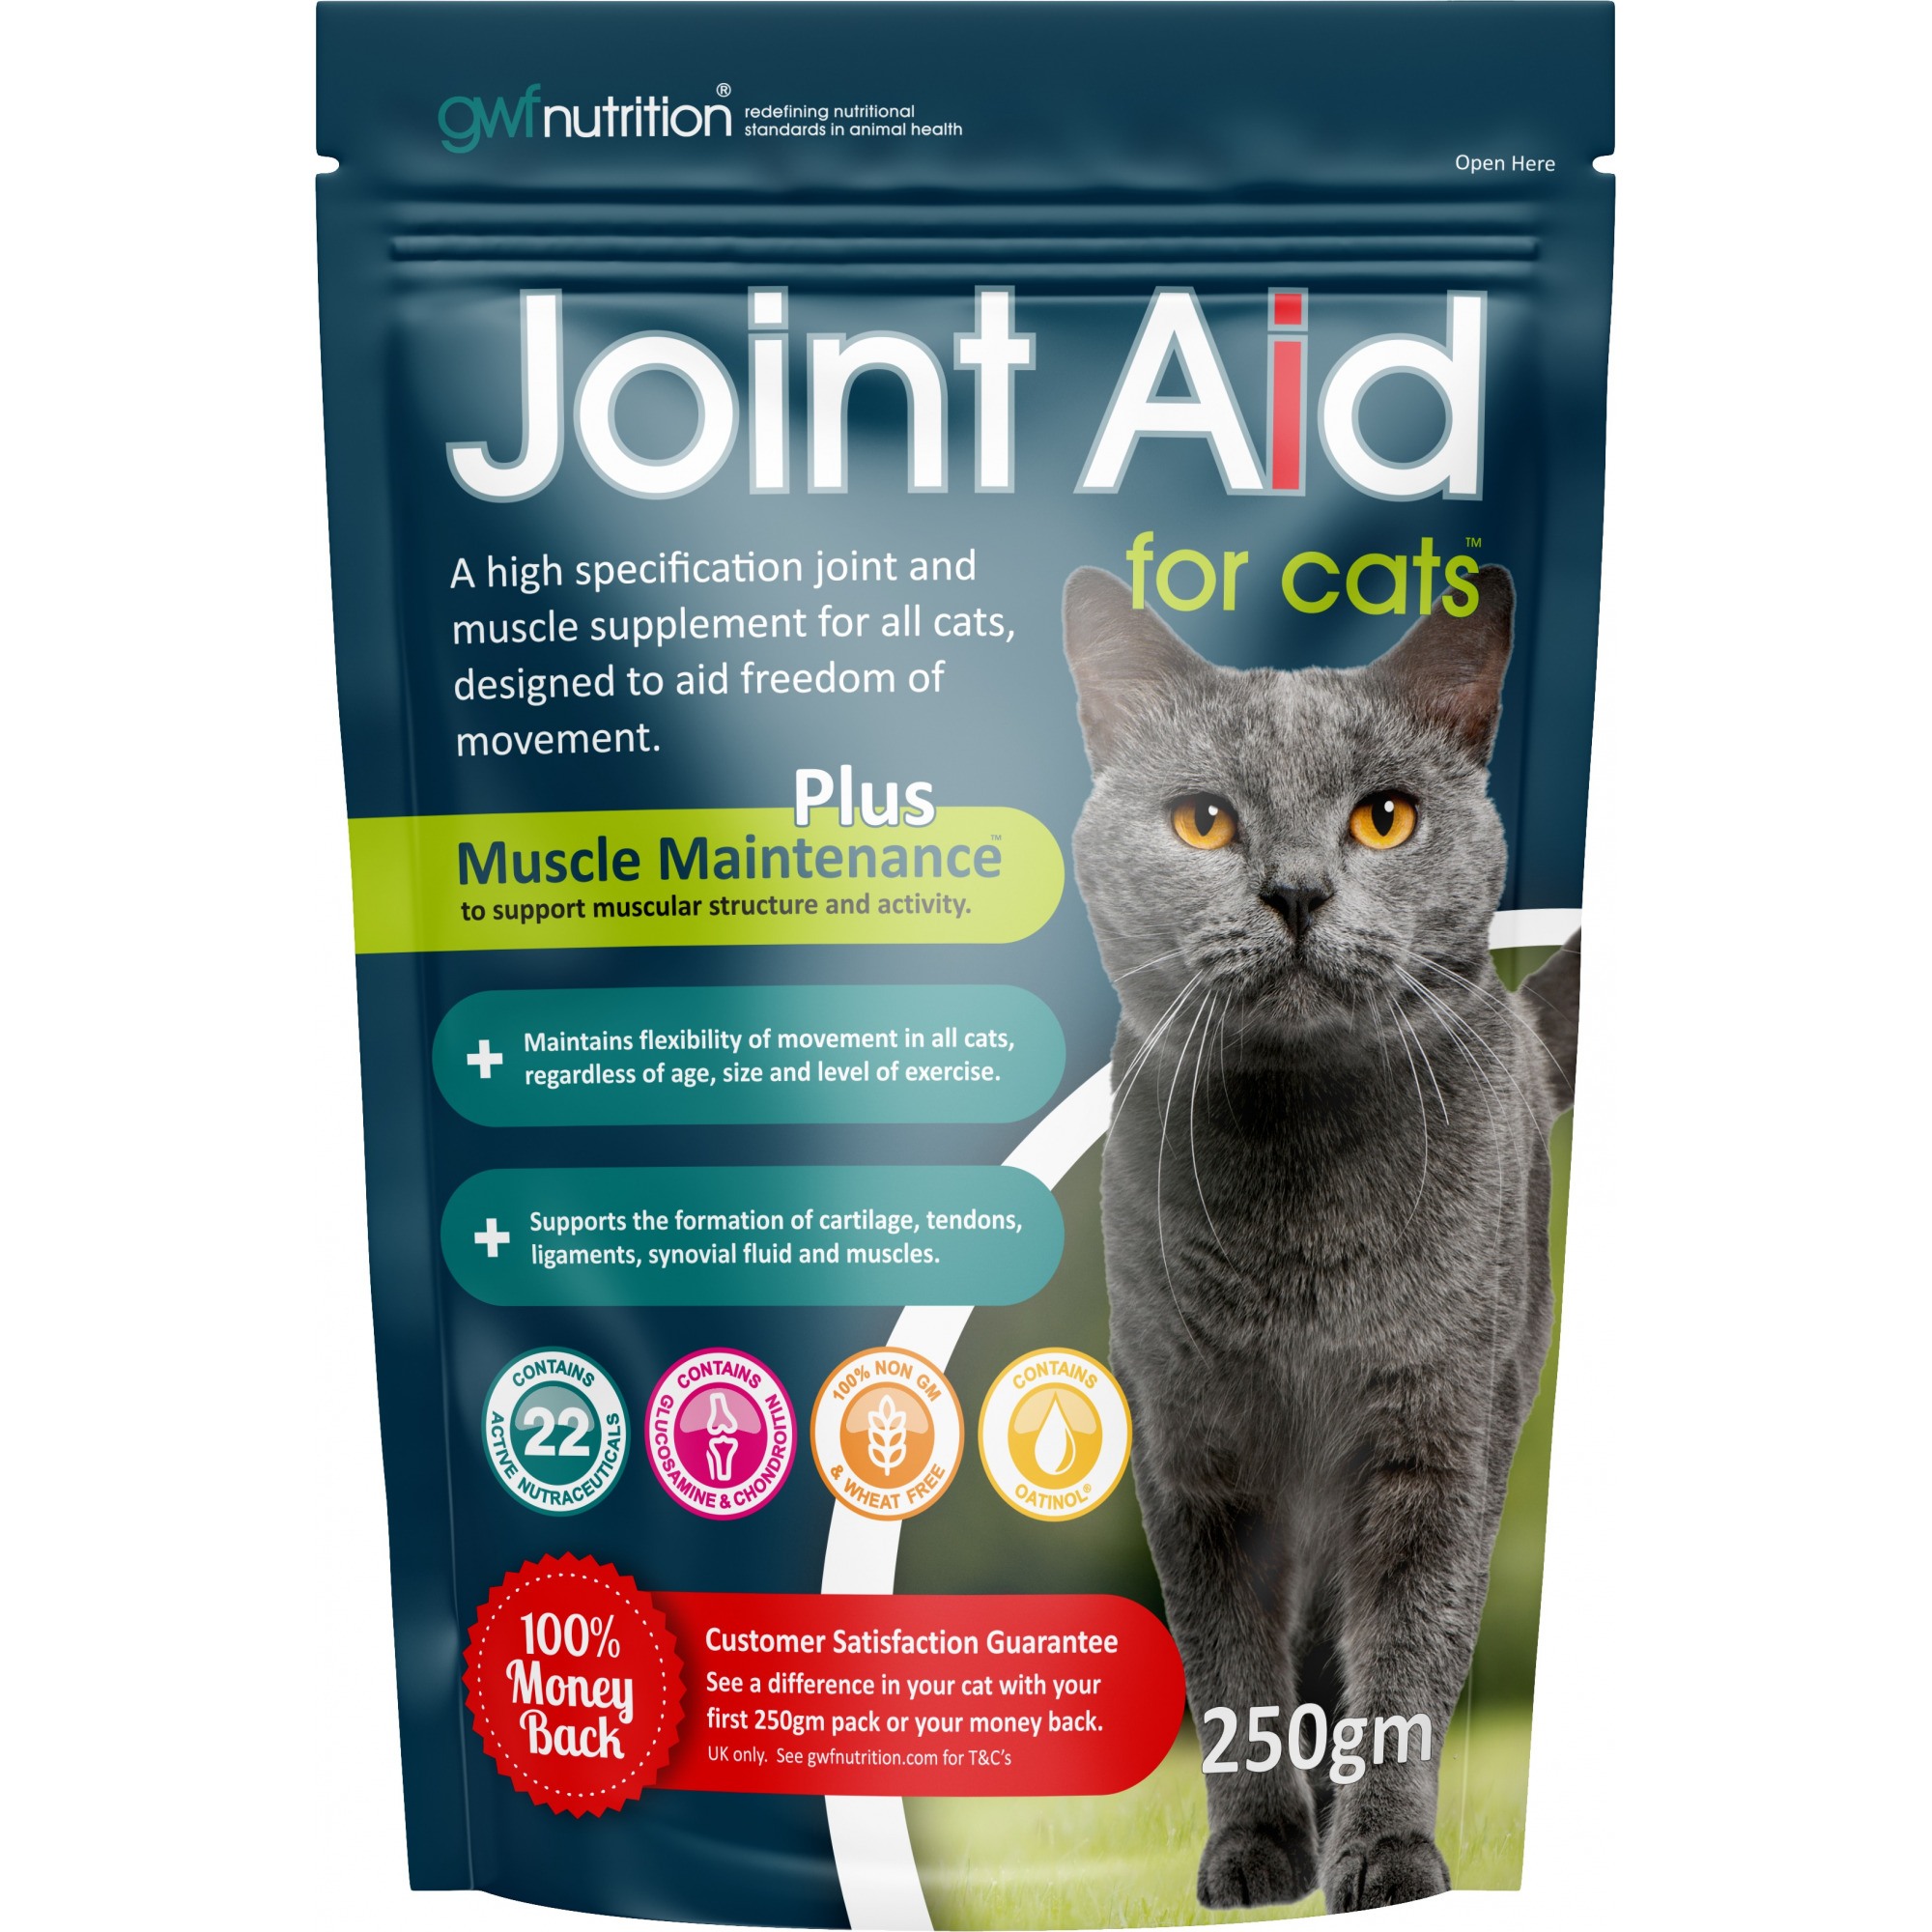 Gwf Nutrition Joint Aid for 🐱 Cats VioVet.co.uk